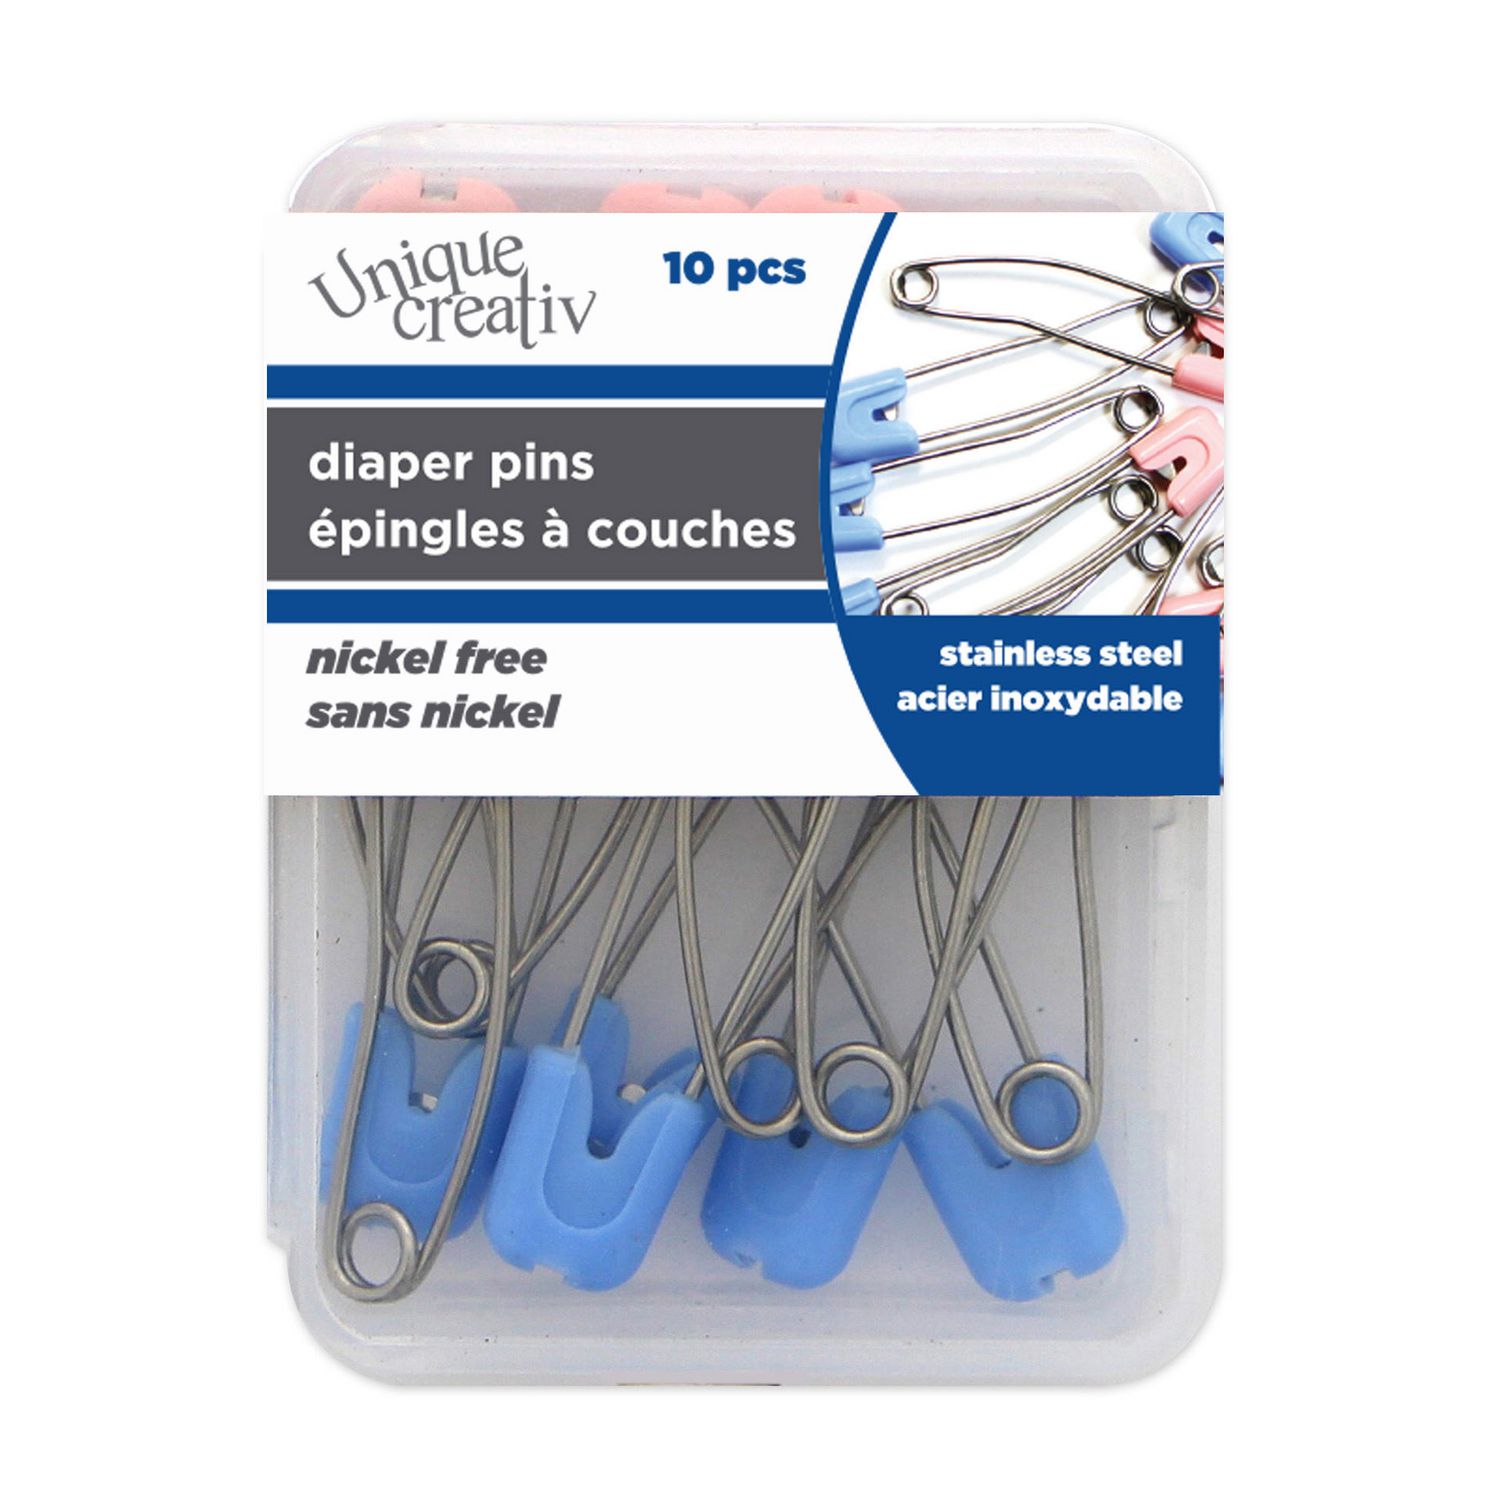 Safety Pins Large Heavy Duty Safety Pin - 15pcs Blanket Pins 3/4 Inch  Stainless Steel Wire Safety Pin Extra Strong & Sturdy Bulk Pins for  Blankets, Skirts, Crafts, Kilts (15pcs) 